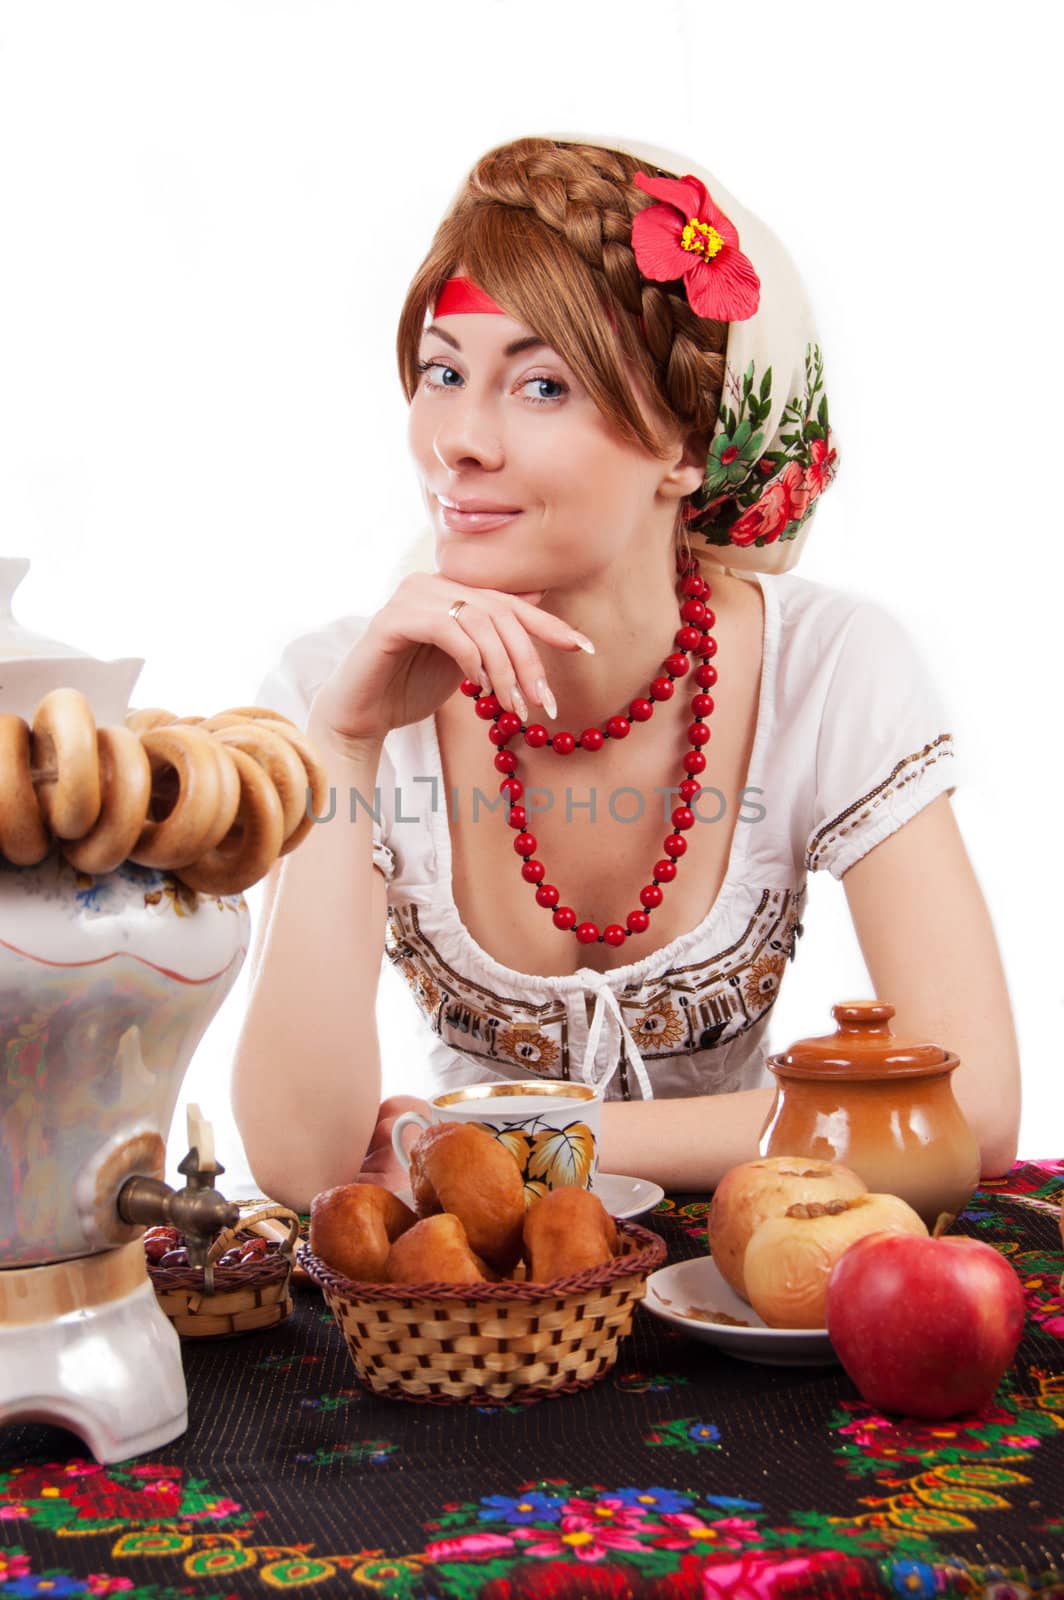 Hospitable russian woman welcomes to drinking tea with samovar over white